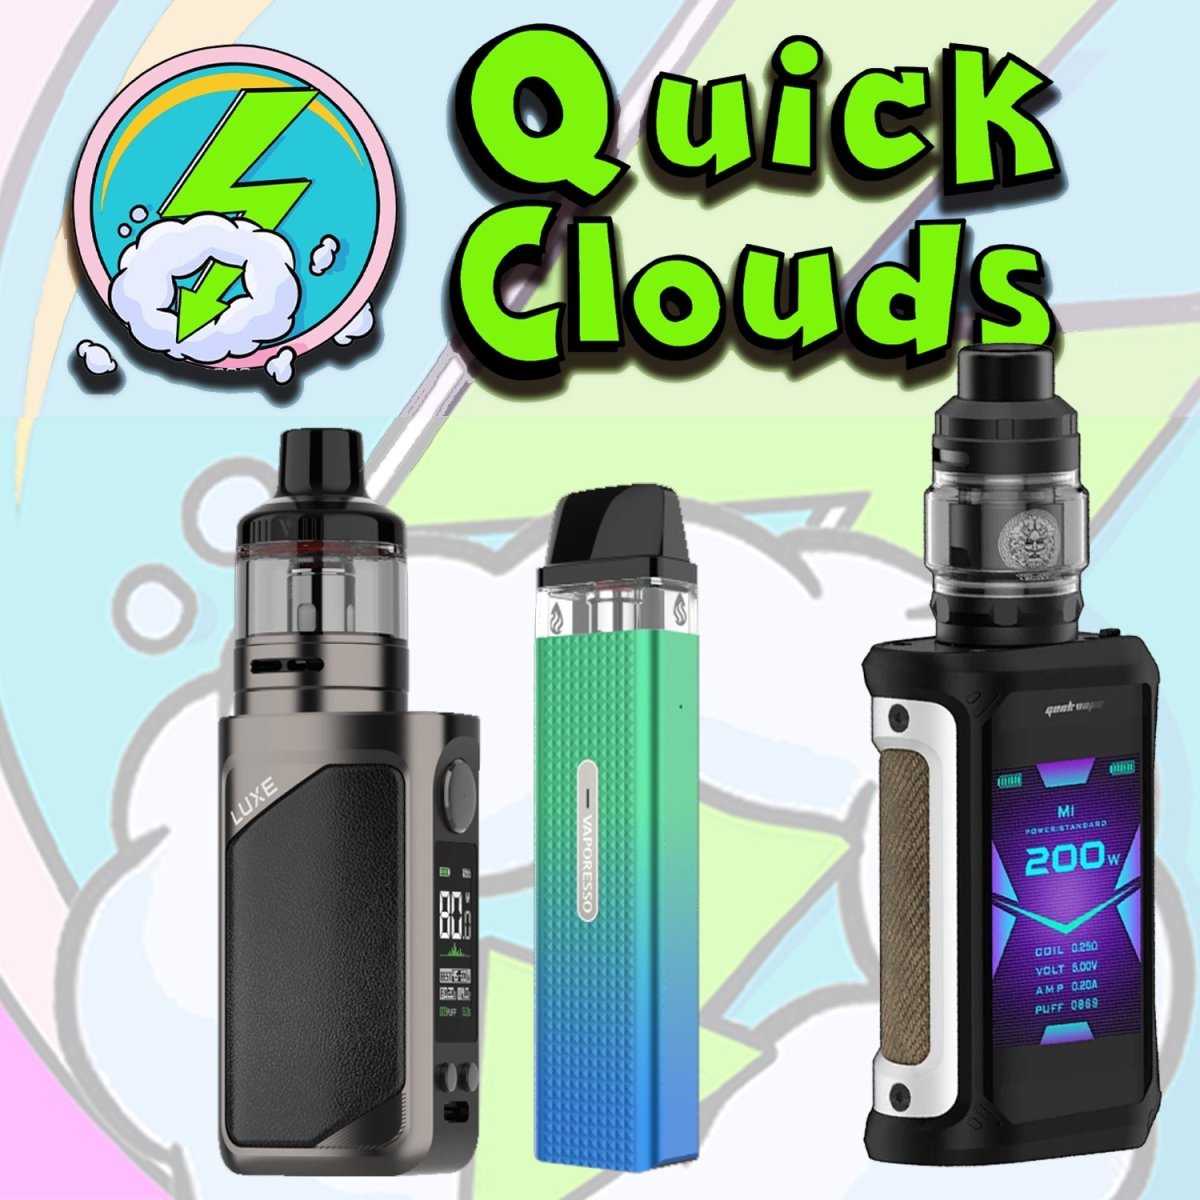 Kits | Quick Clouds Vape Shop and Delivery